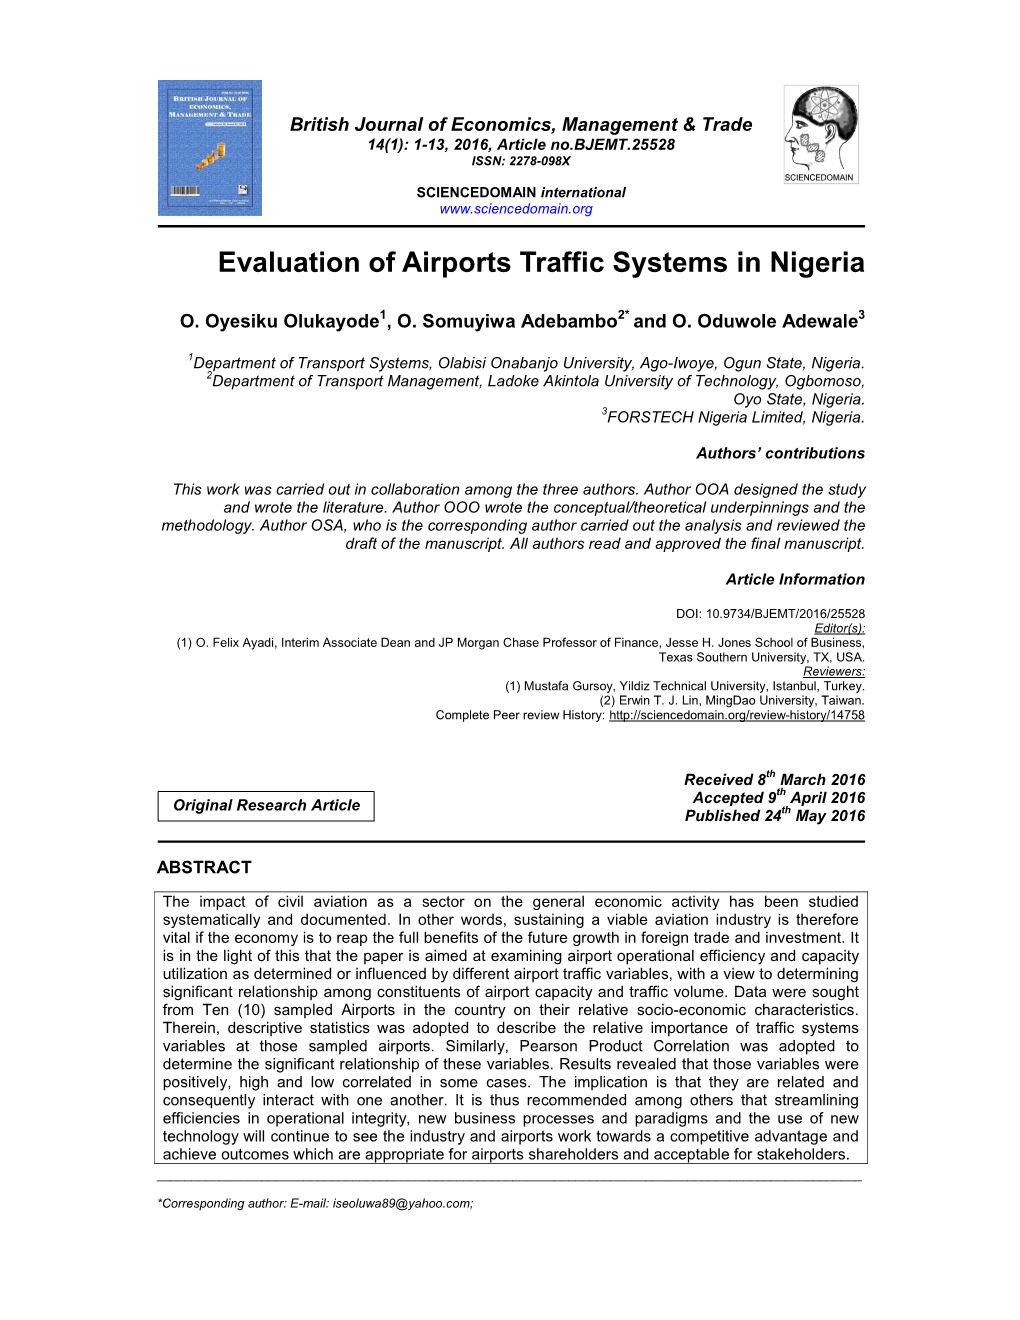 Evaluation of Airports Traffic Systems in Nigeria